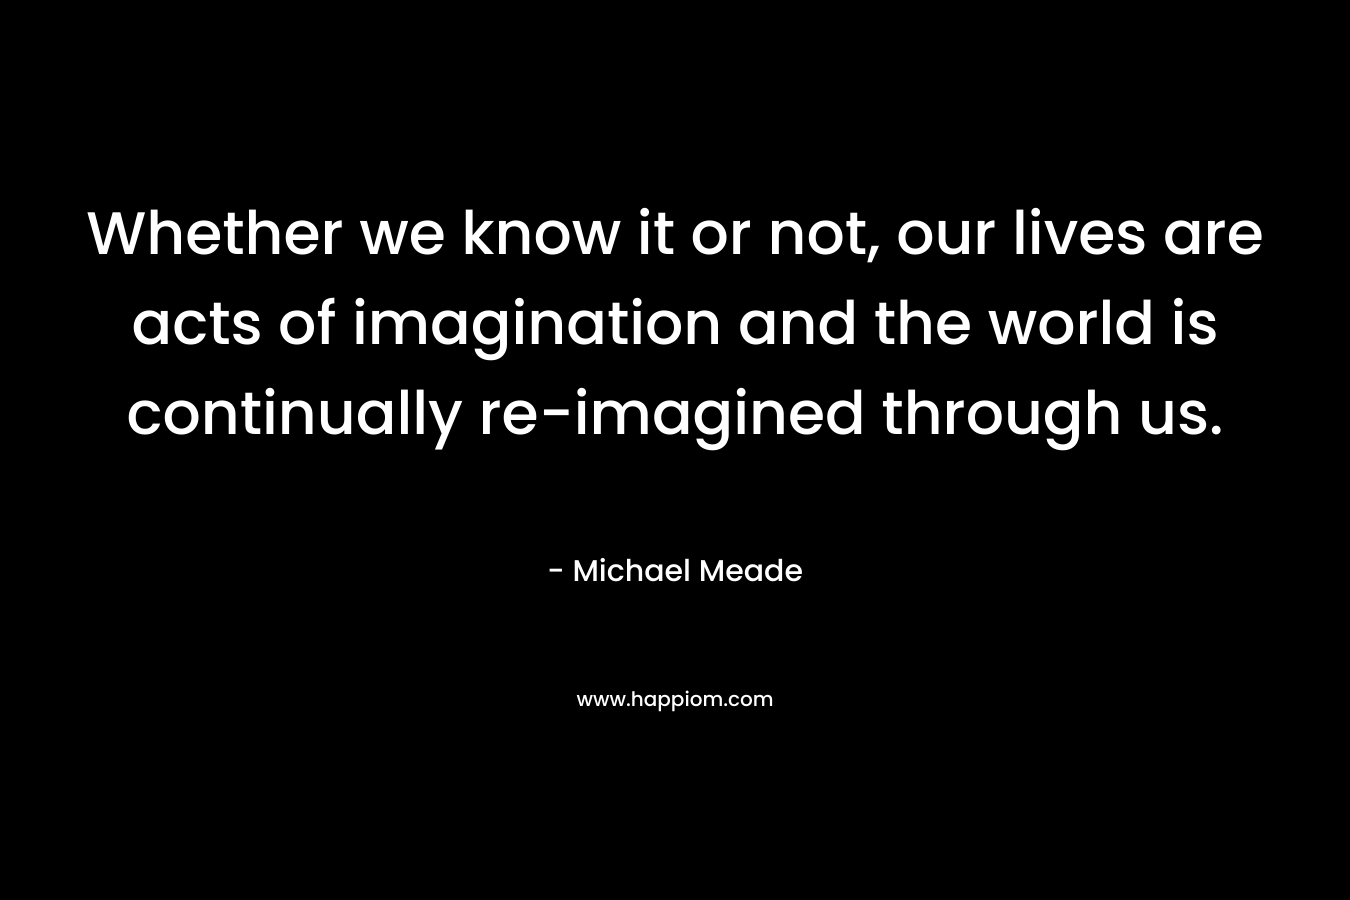 Whether we know it or not, our lives are acts of imagination and the world is continually re-imagined through us.